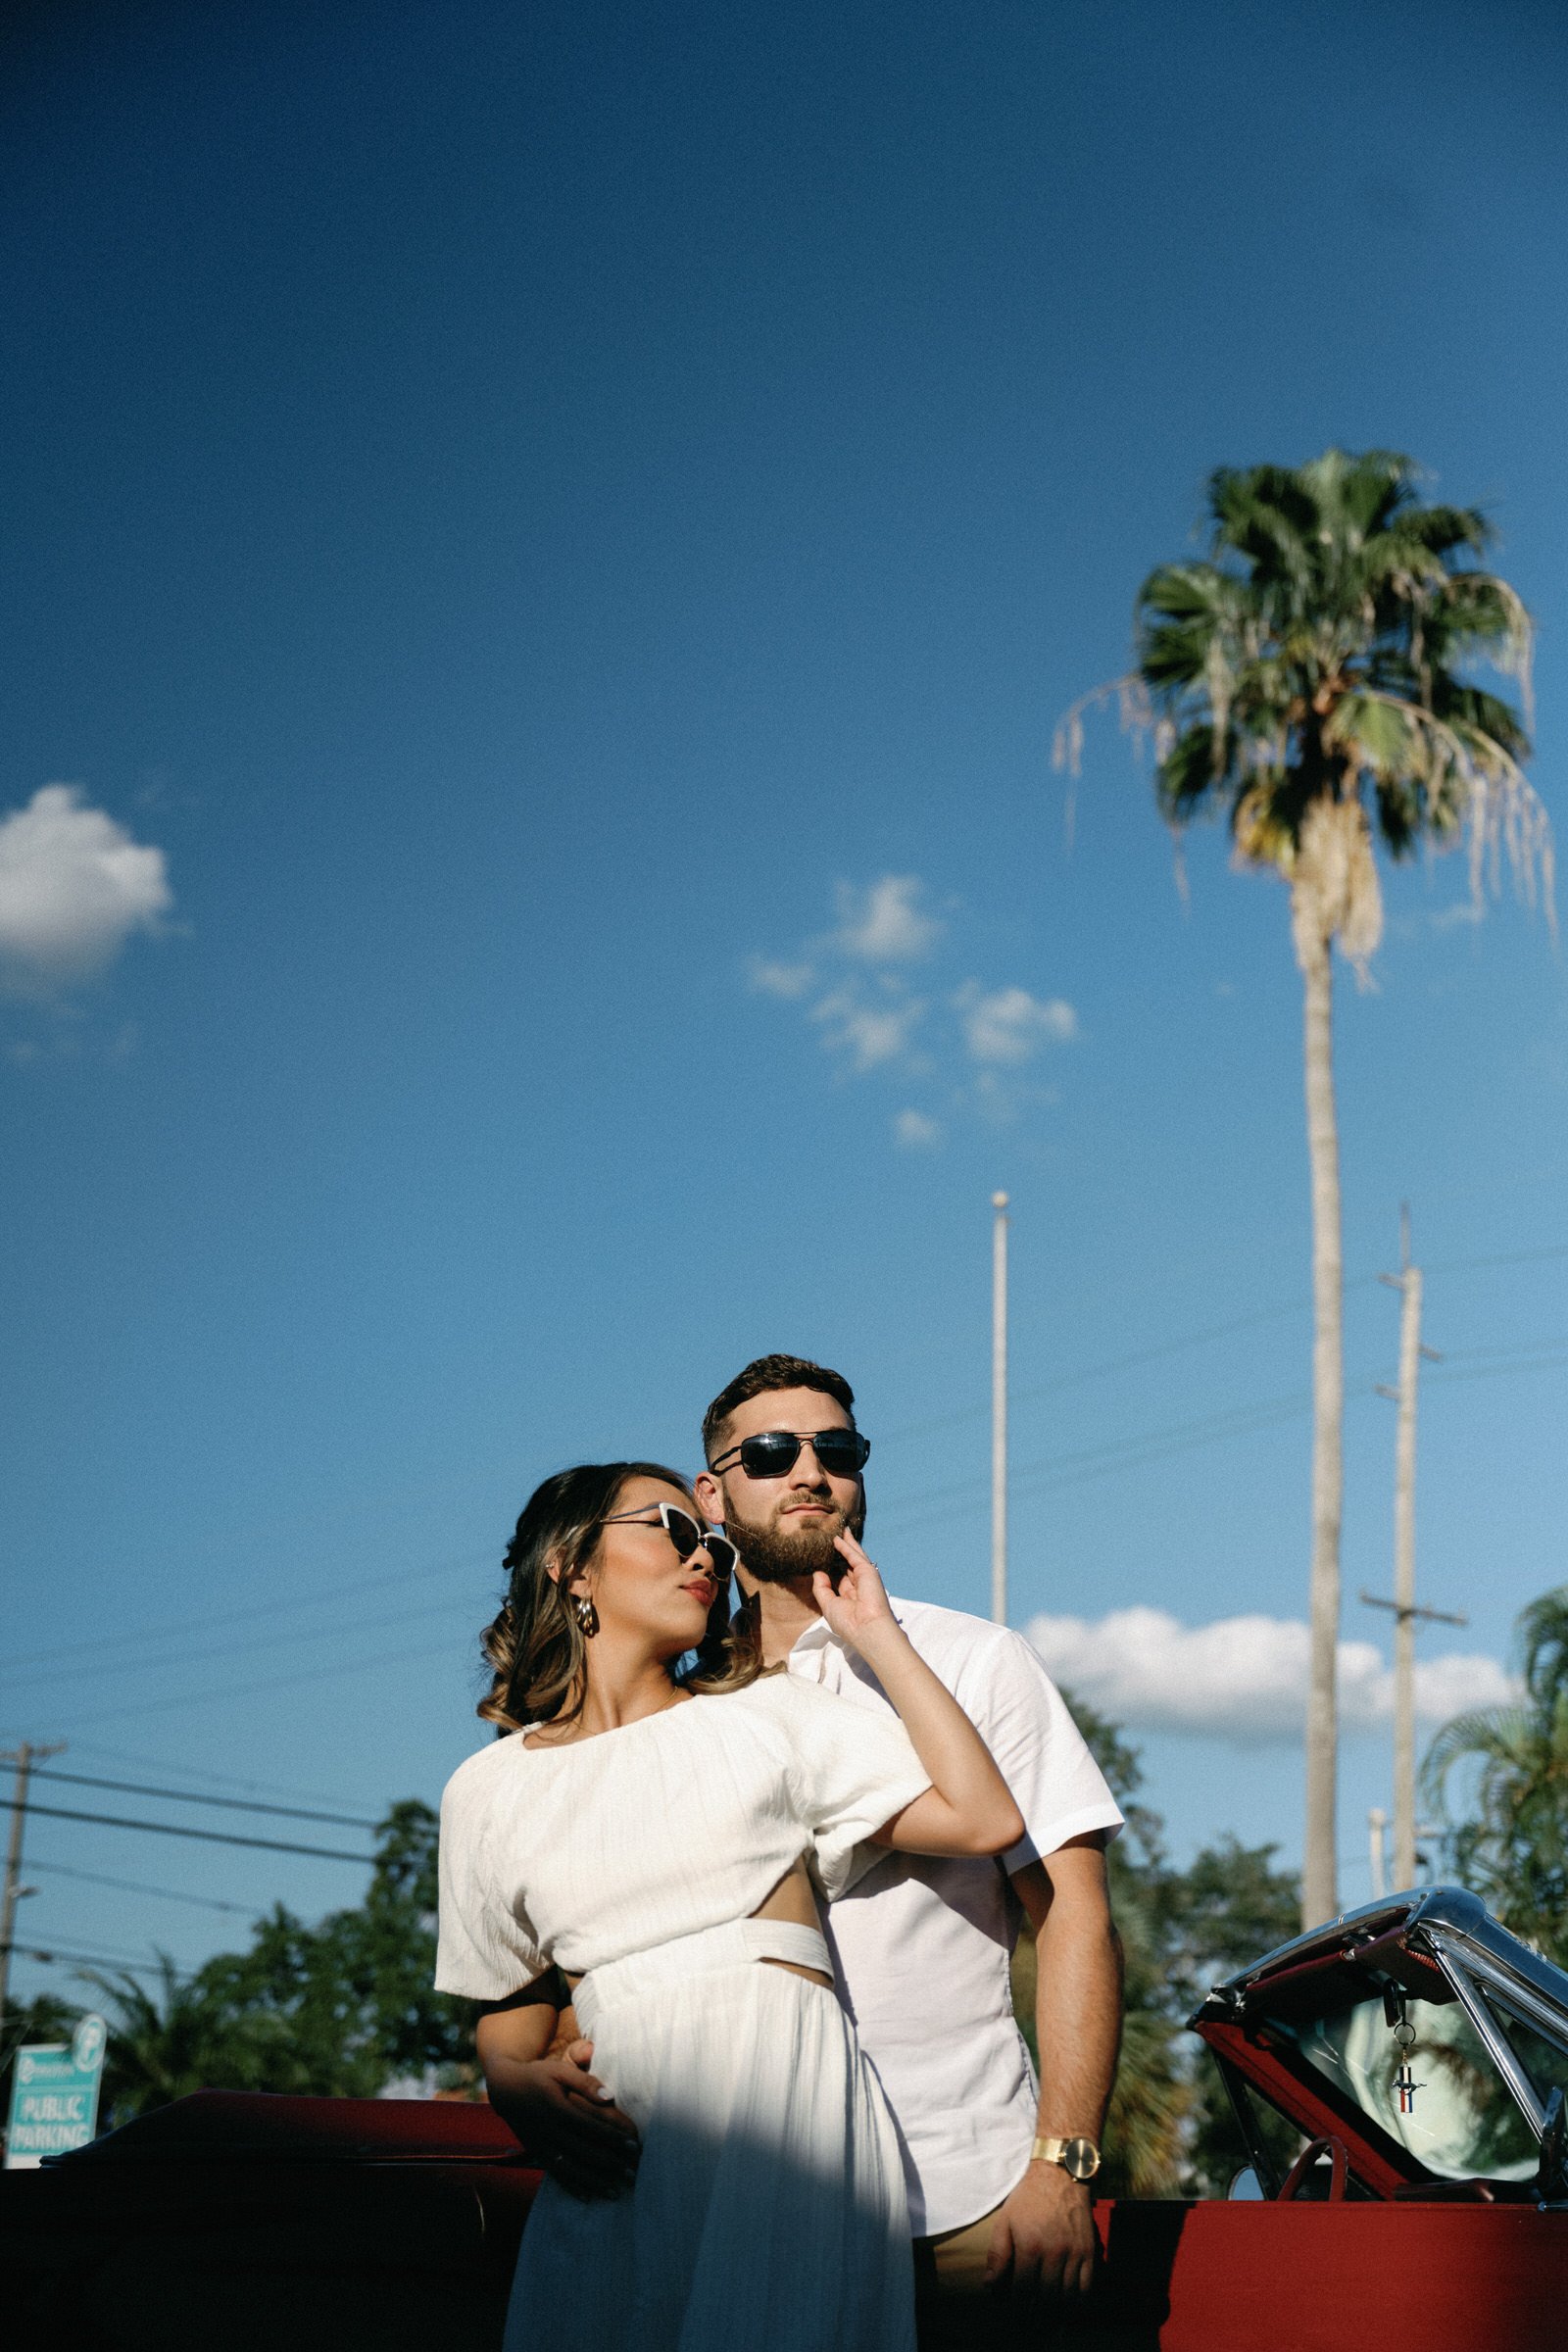 Copyright-Dewitt-for-Love-Photography-M-M-Ybor-City-Tampa-Engagement-Session-22.jpg